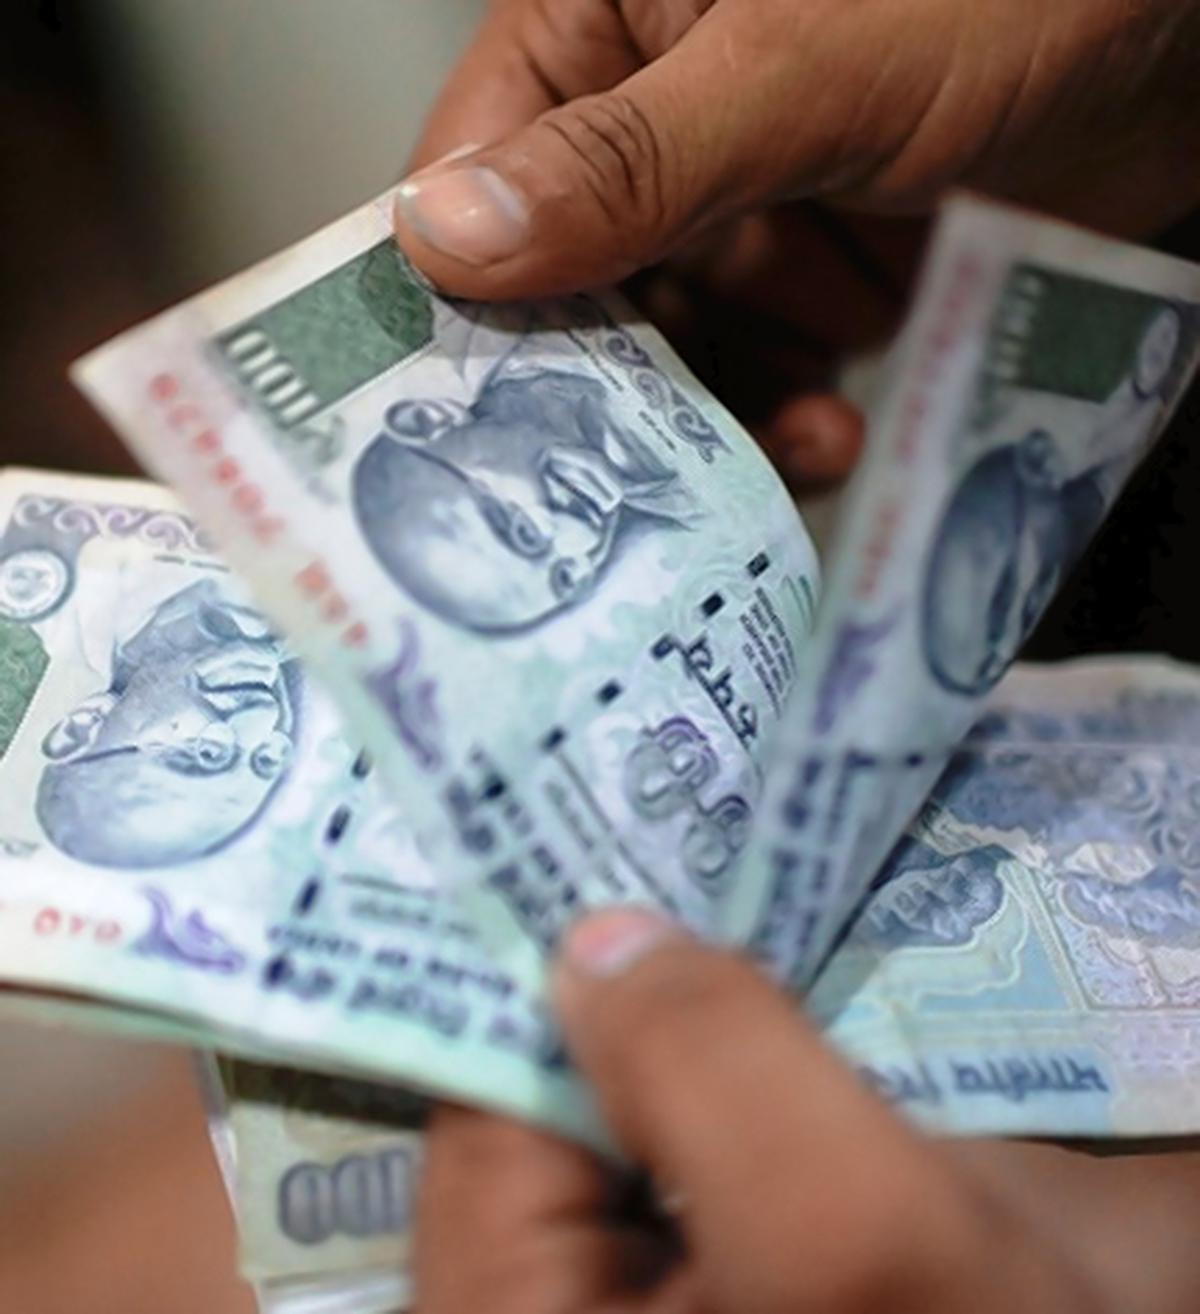 In Early Trade, The Indian Rupee Falls Against The UAE Dirham - Inventiva